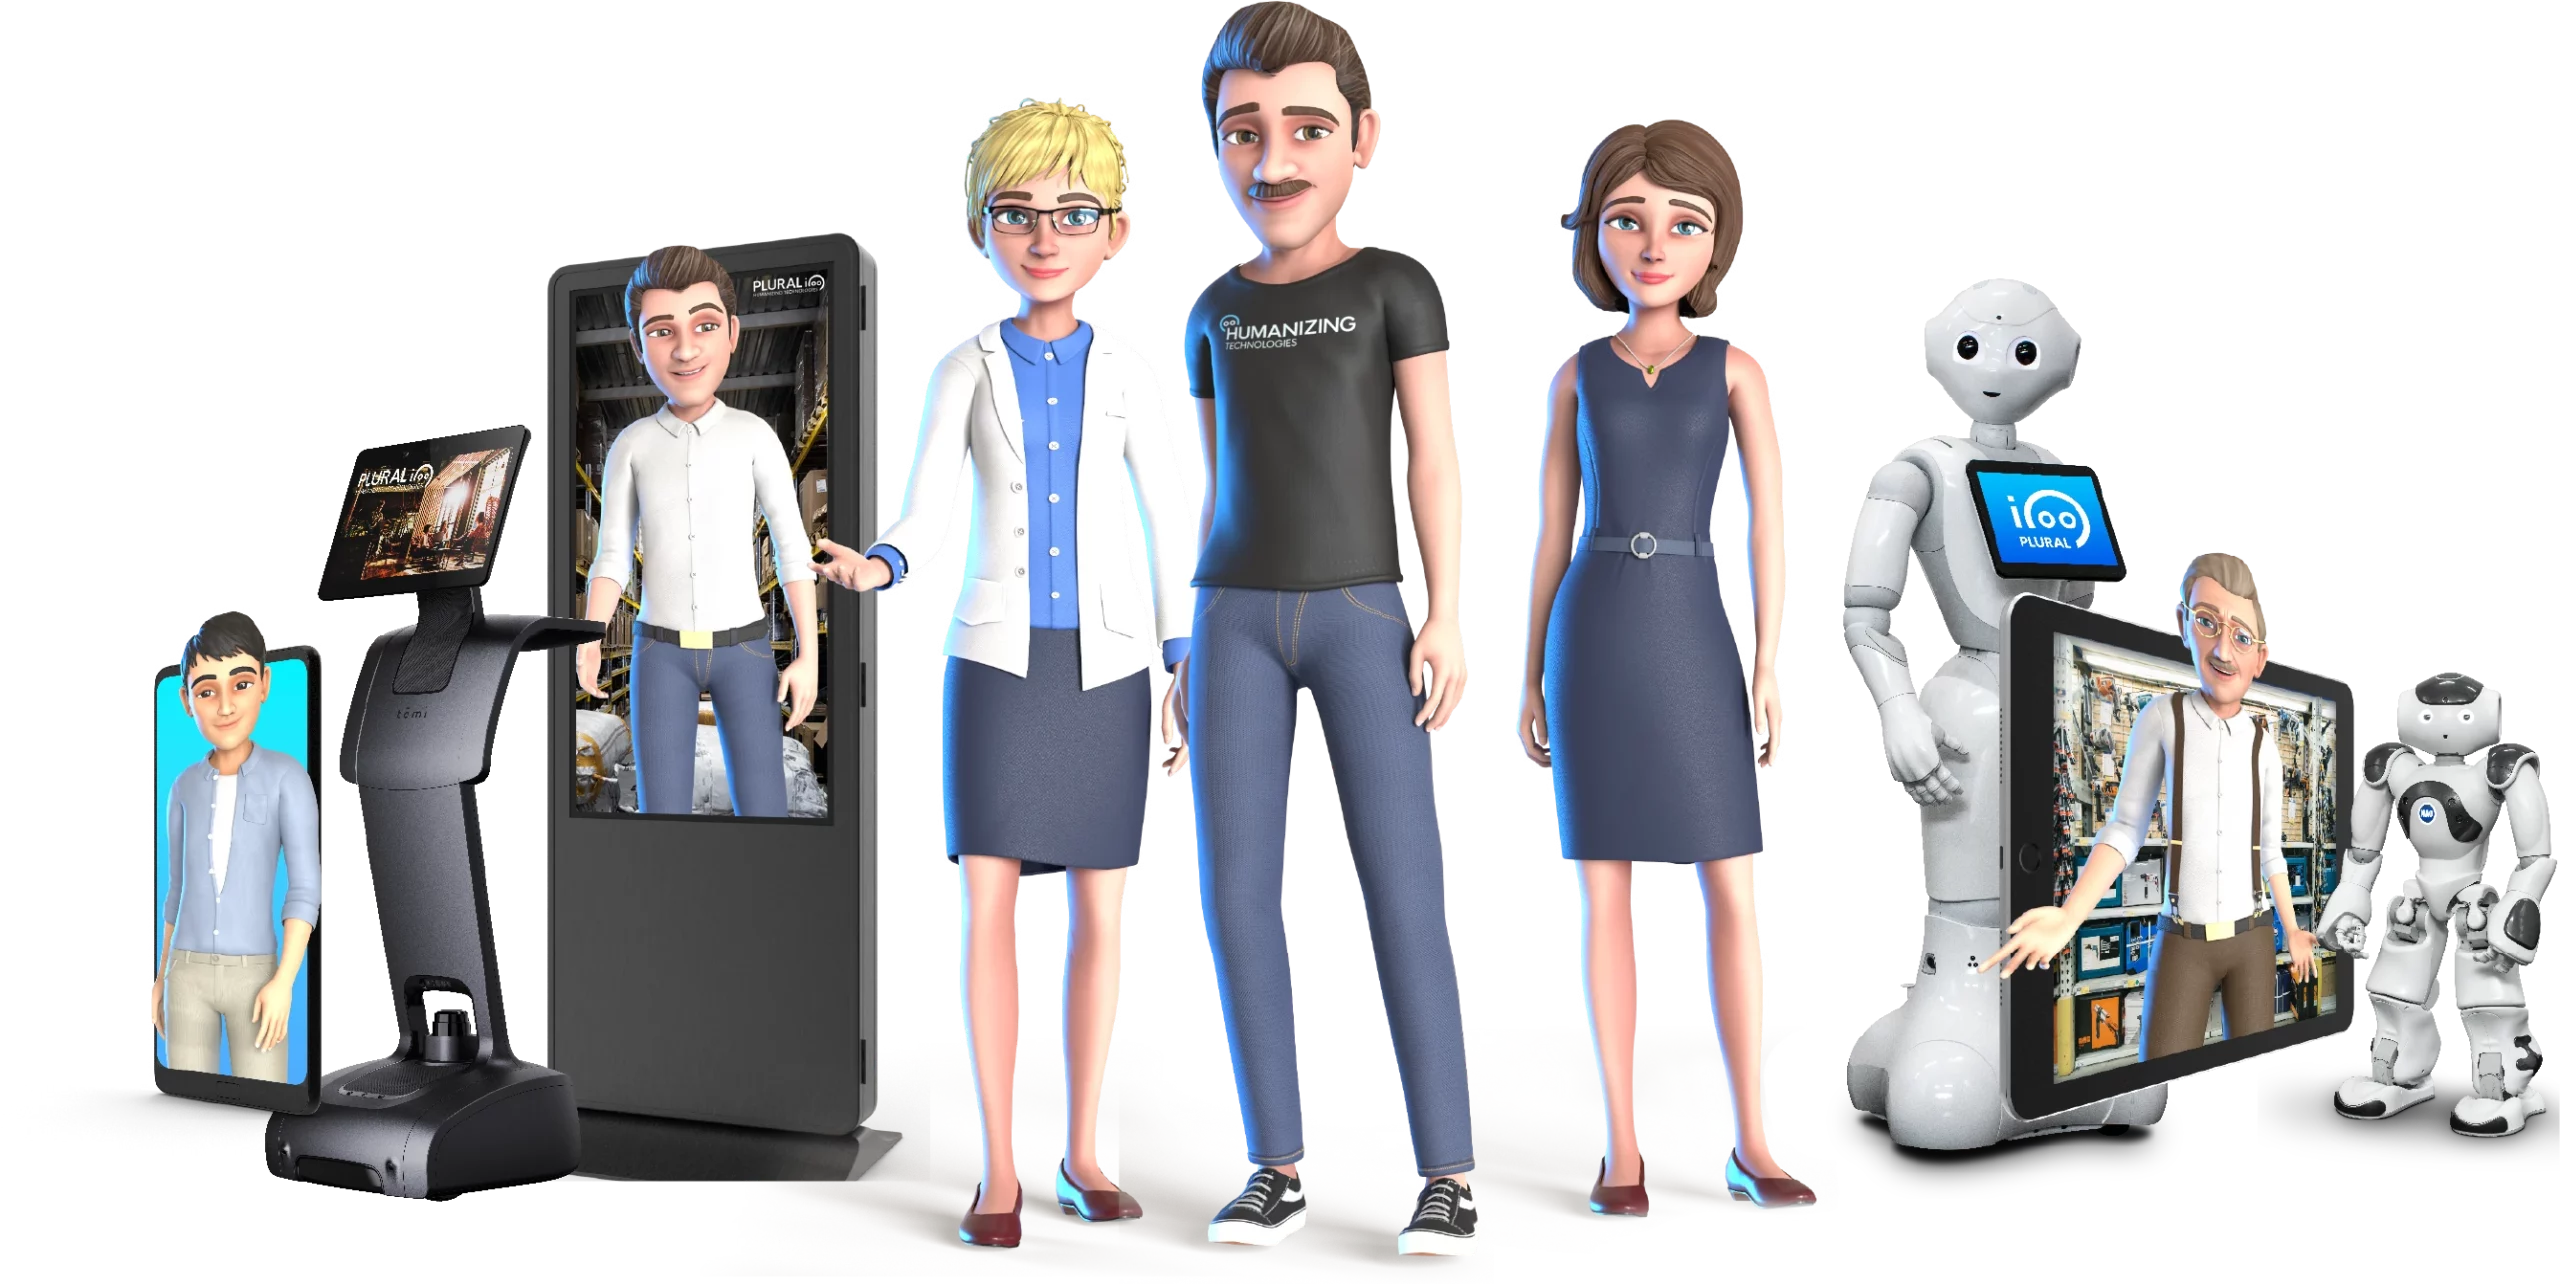 Assortment of Humanizing's interactive Avatars on different devices as well as different robots such as temi, Pepper and NAO.